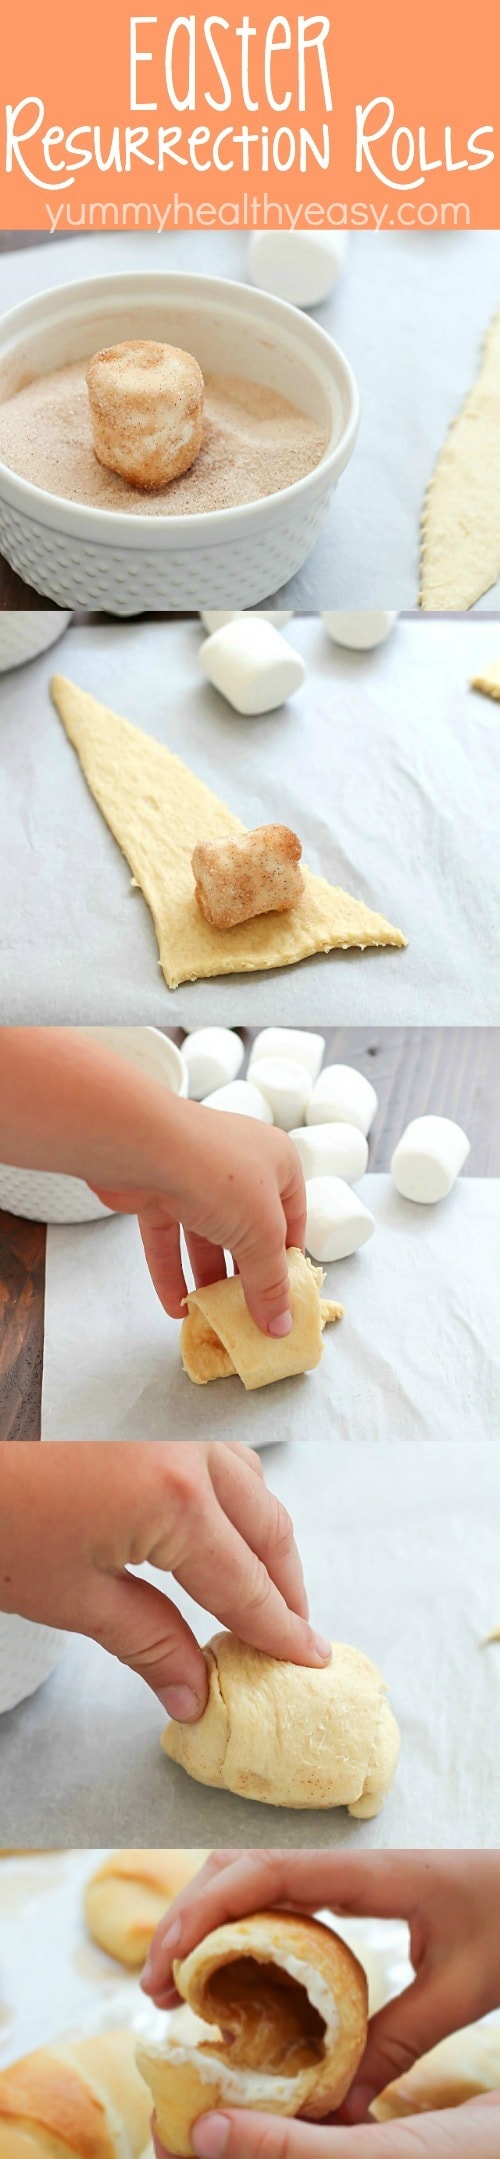 Eater Resurrection Rolls - aka Disappearing Marshmallow Rolls! A fun Easter treat that teaches children (and adults!) the real reason behind the holiday of Easter. These resurrection rolls are so easy to make and absolutely delicious!